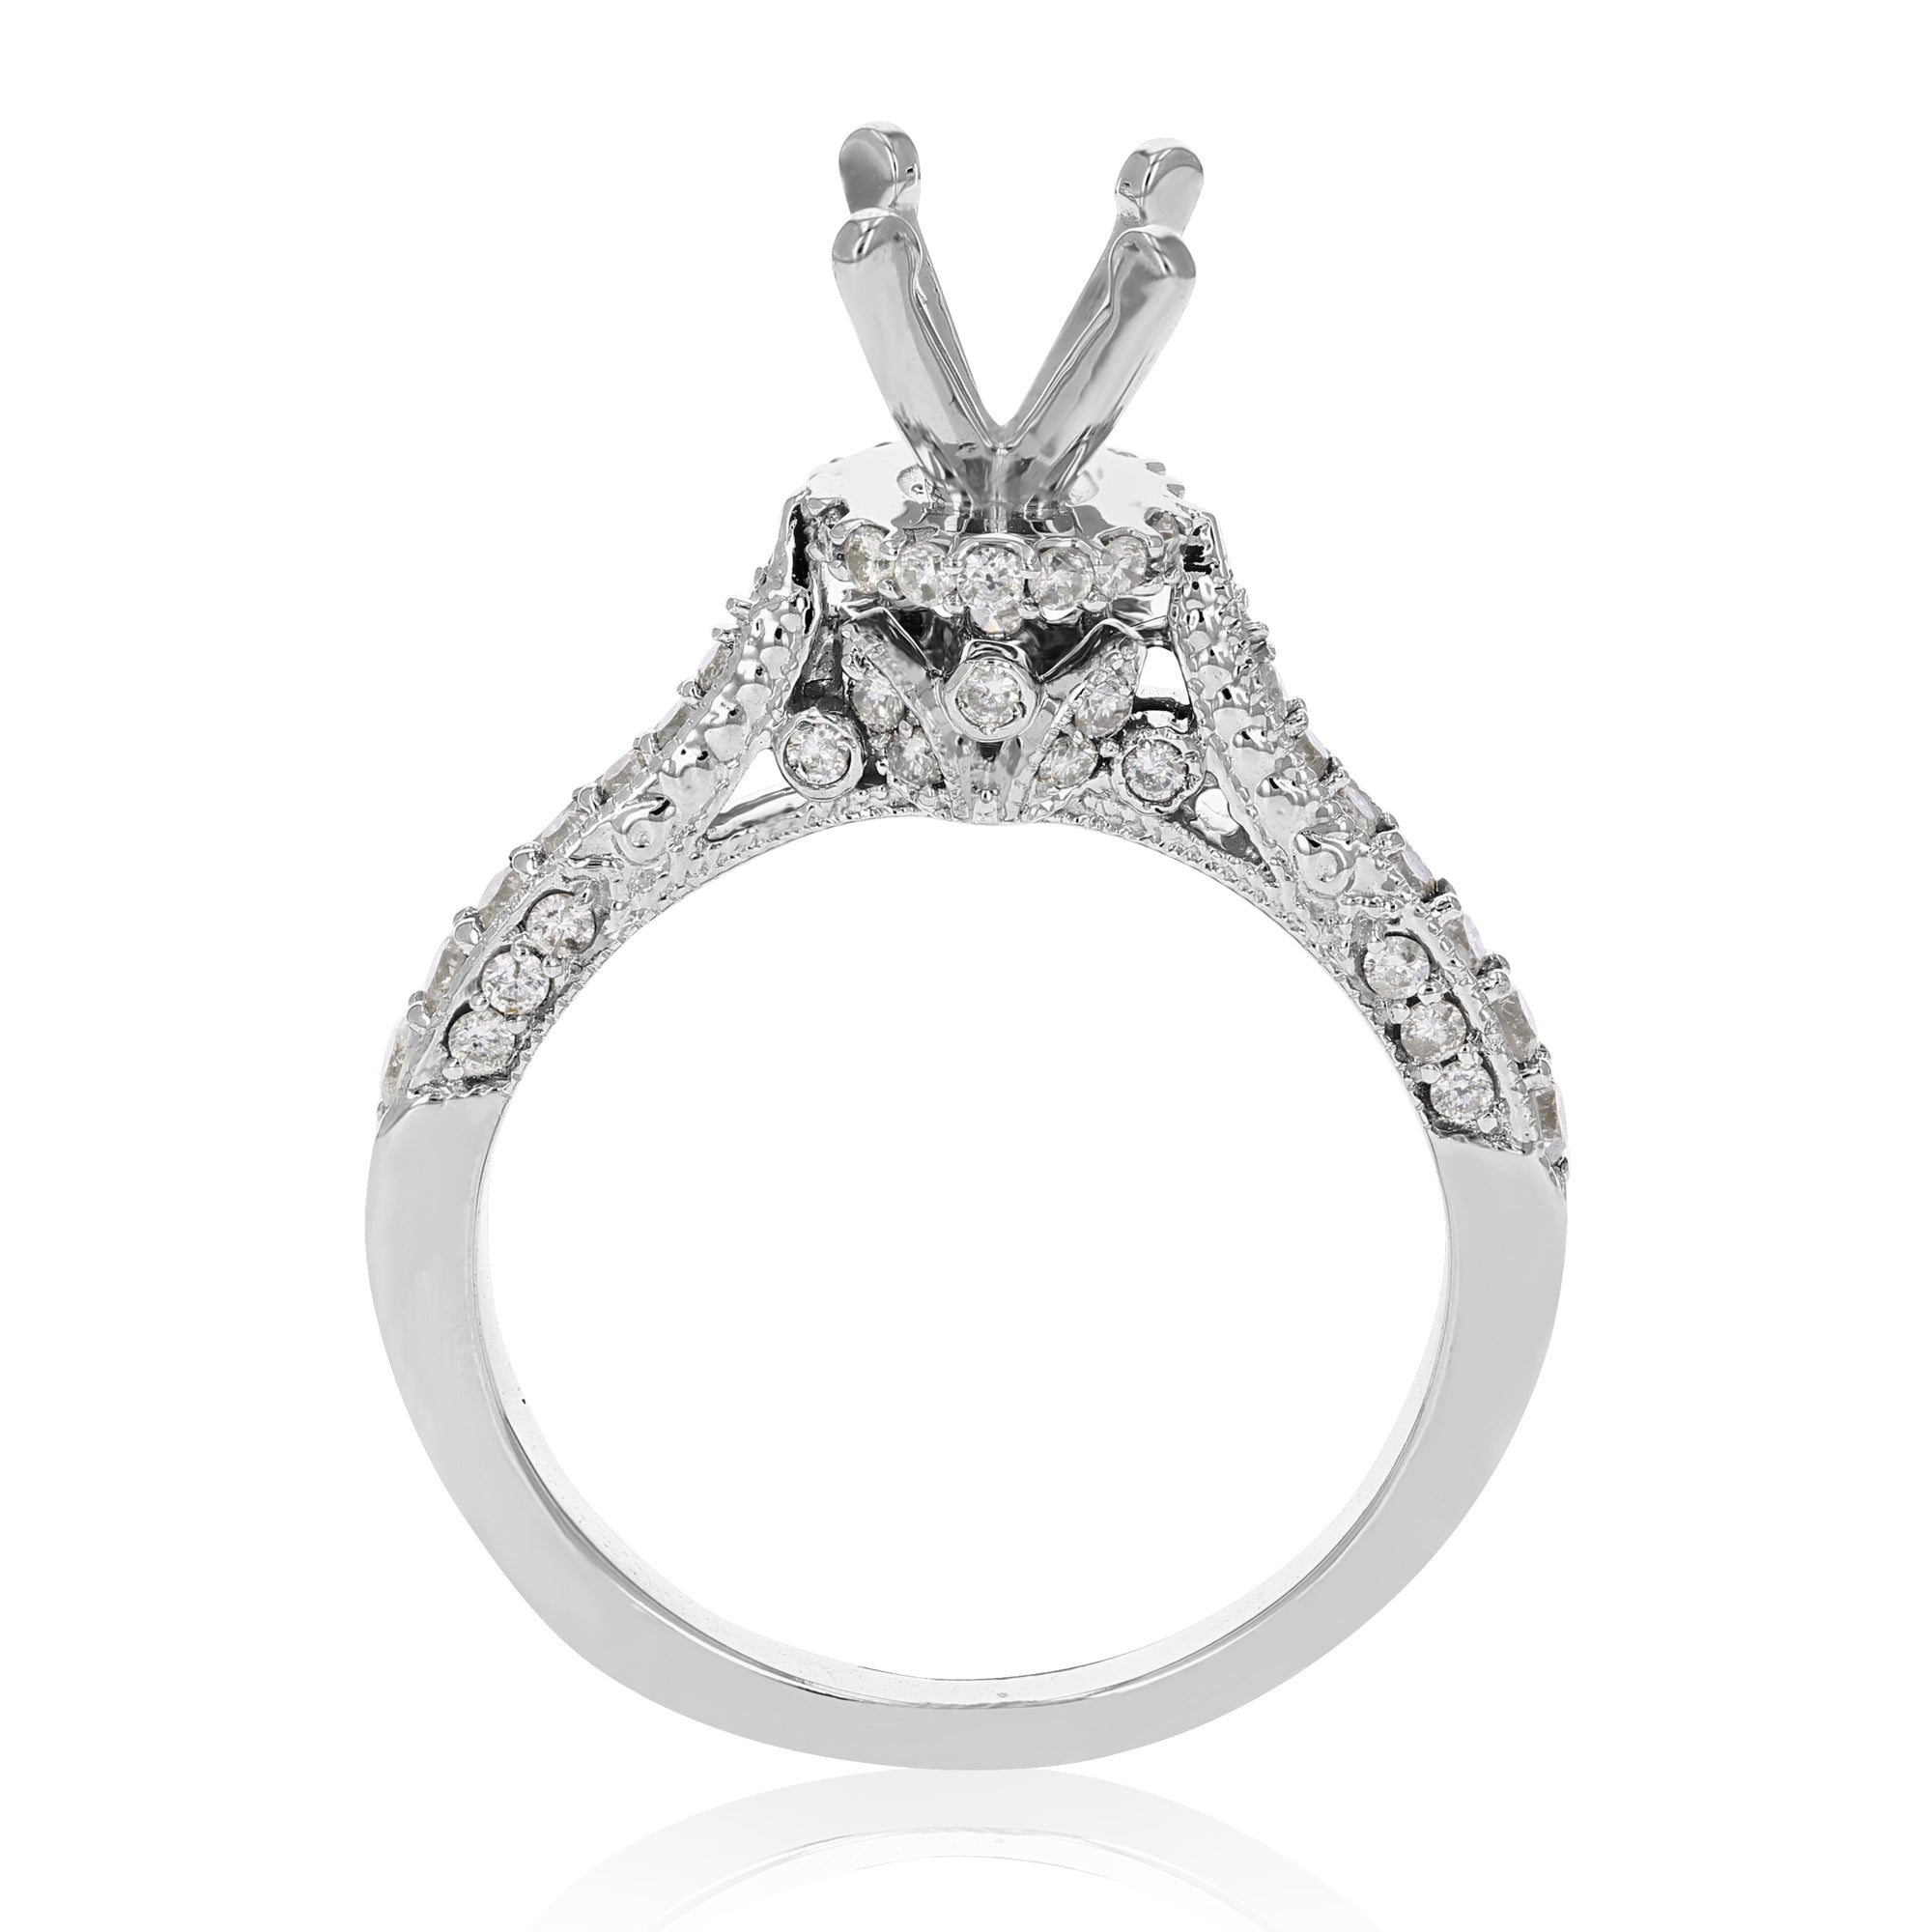 1/2 cttw Semi Mount Diamond Engagement Ring 14K White Gold Solitaire Size 7